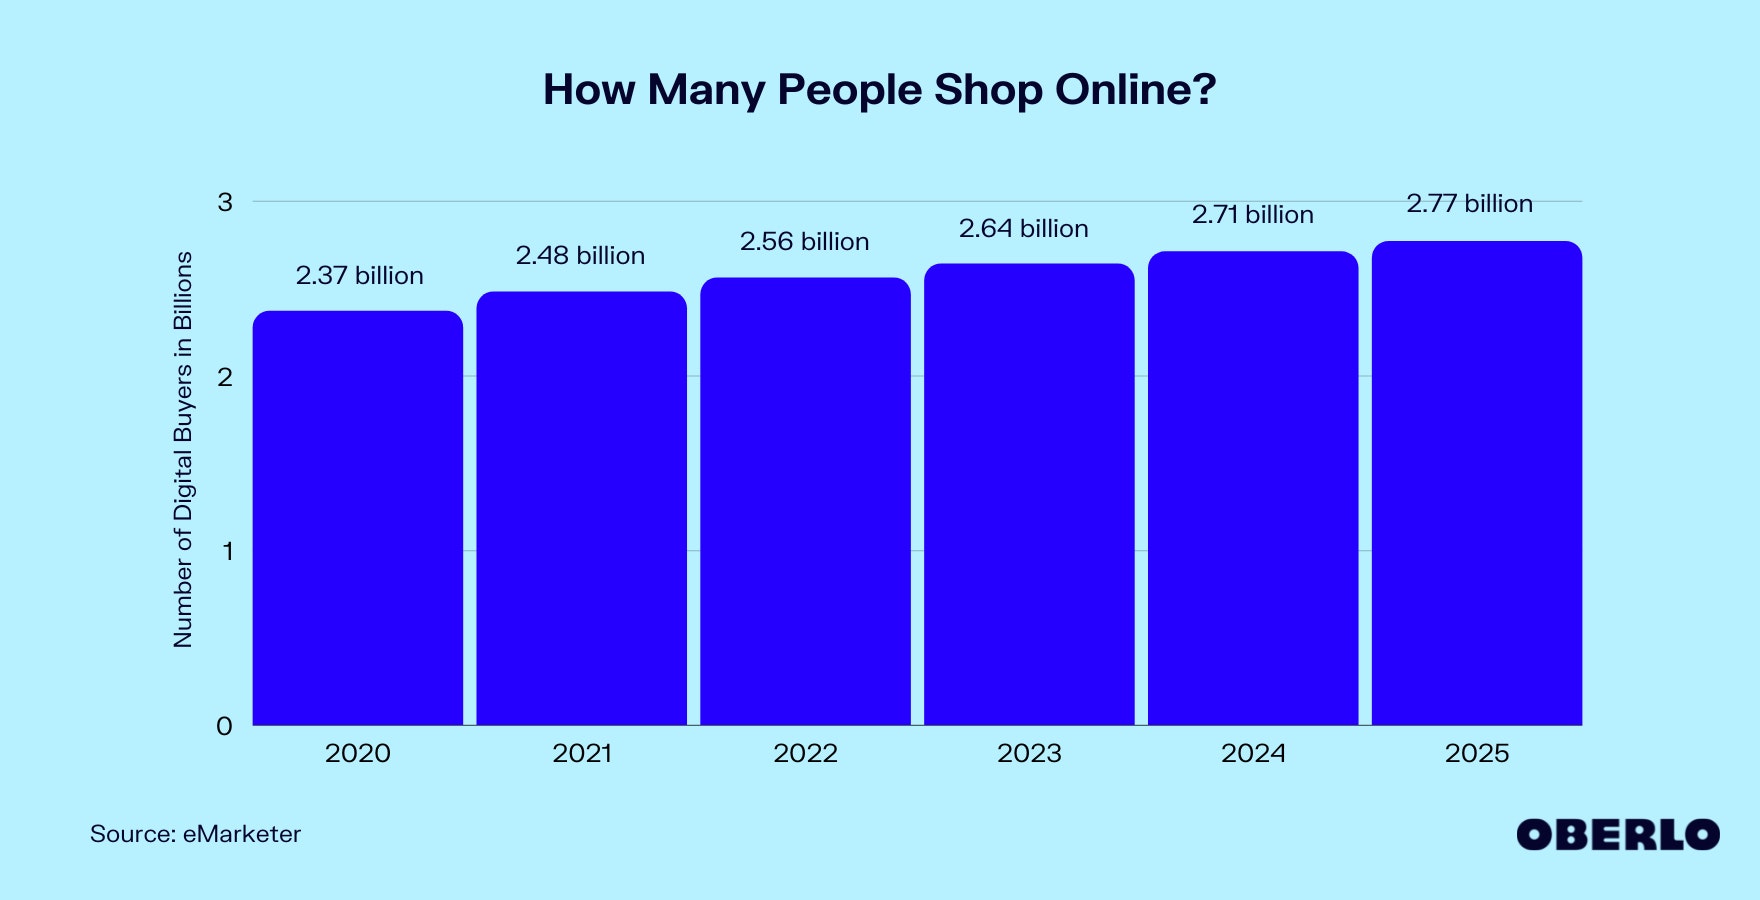 How Many People Shop Online in 2021?